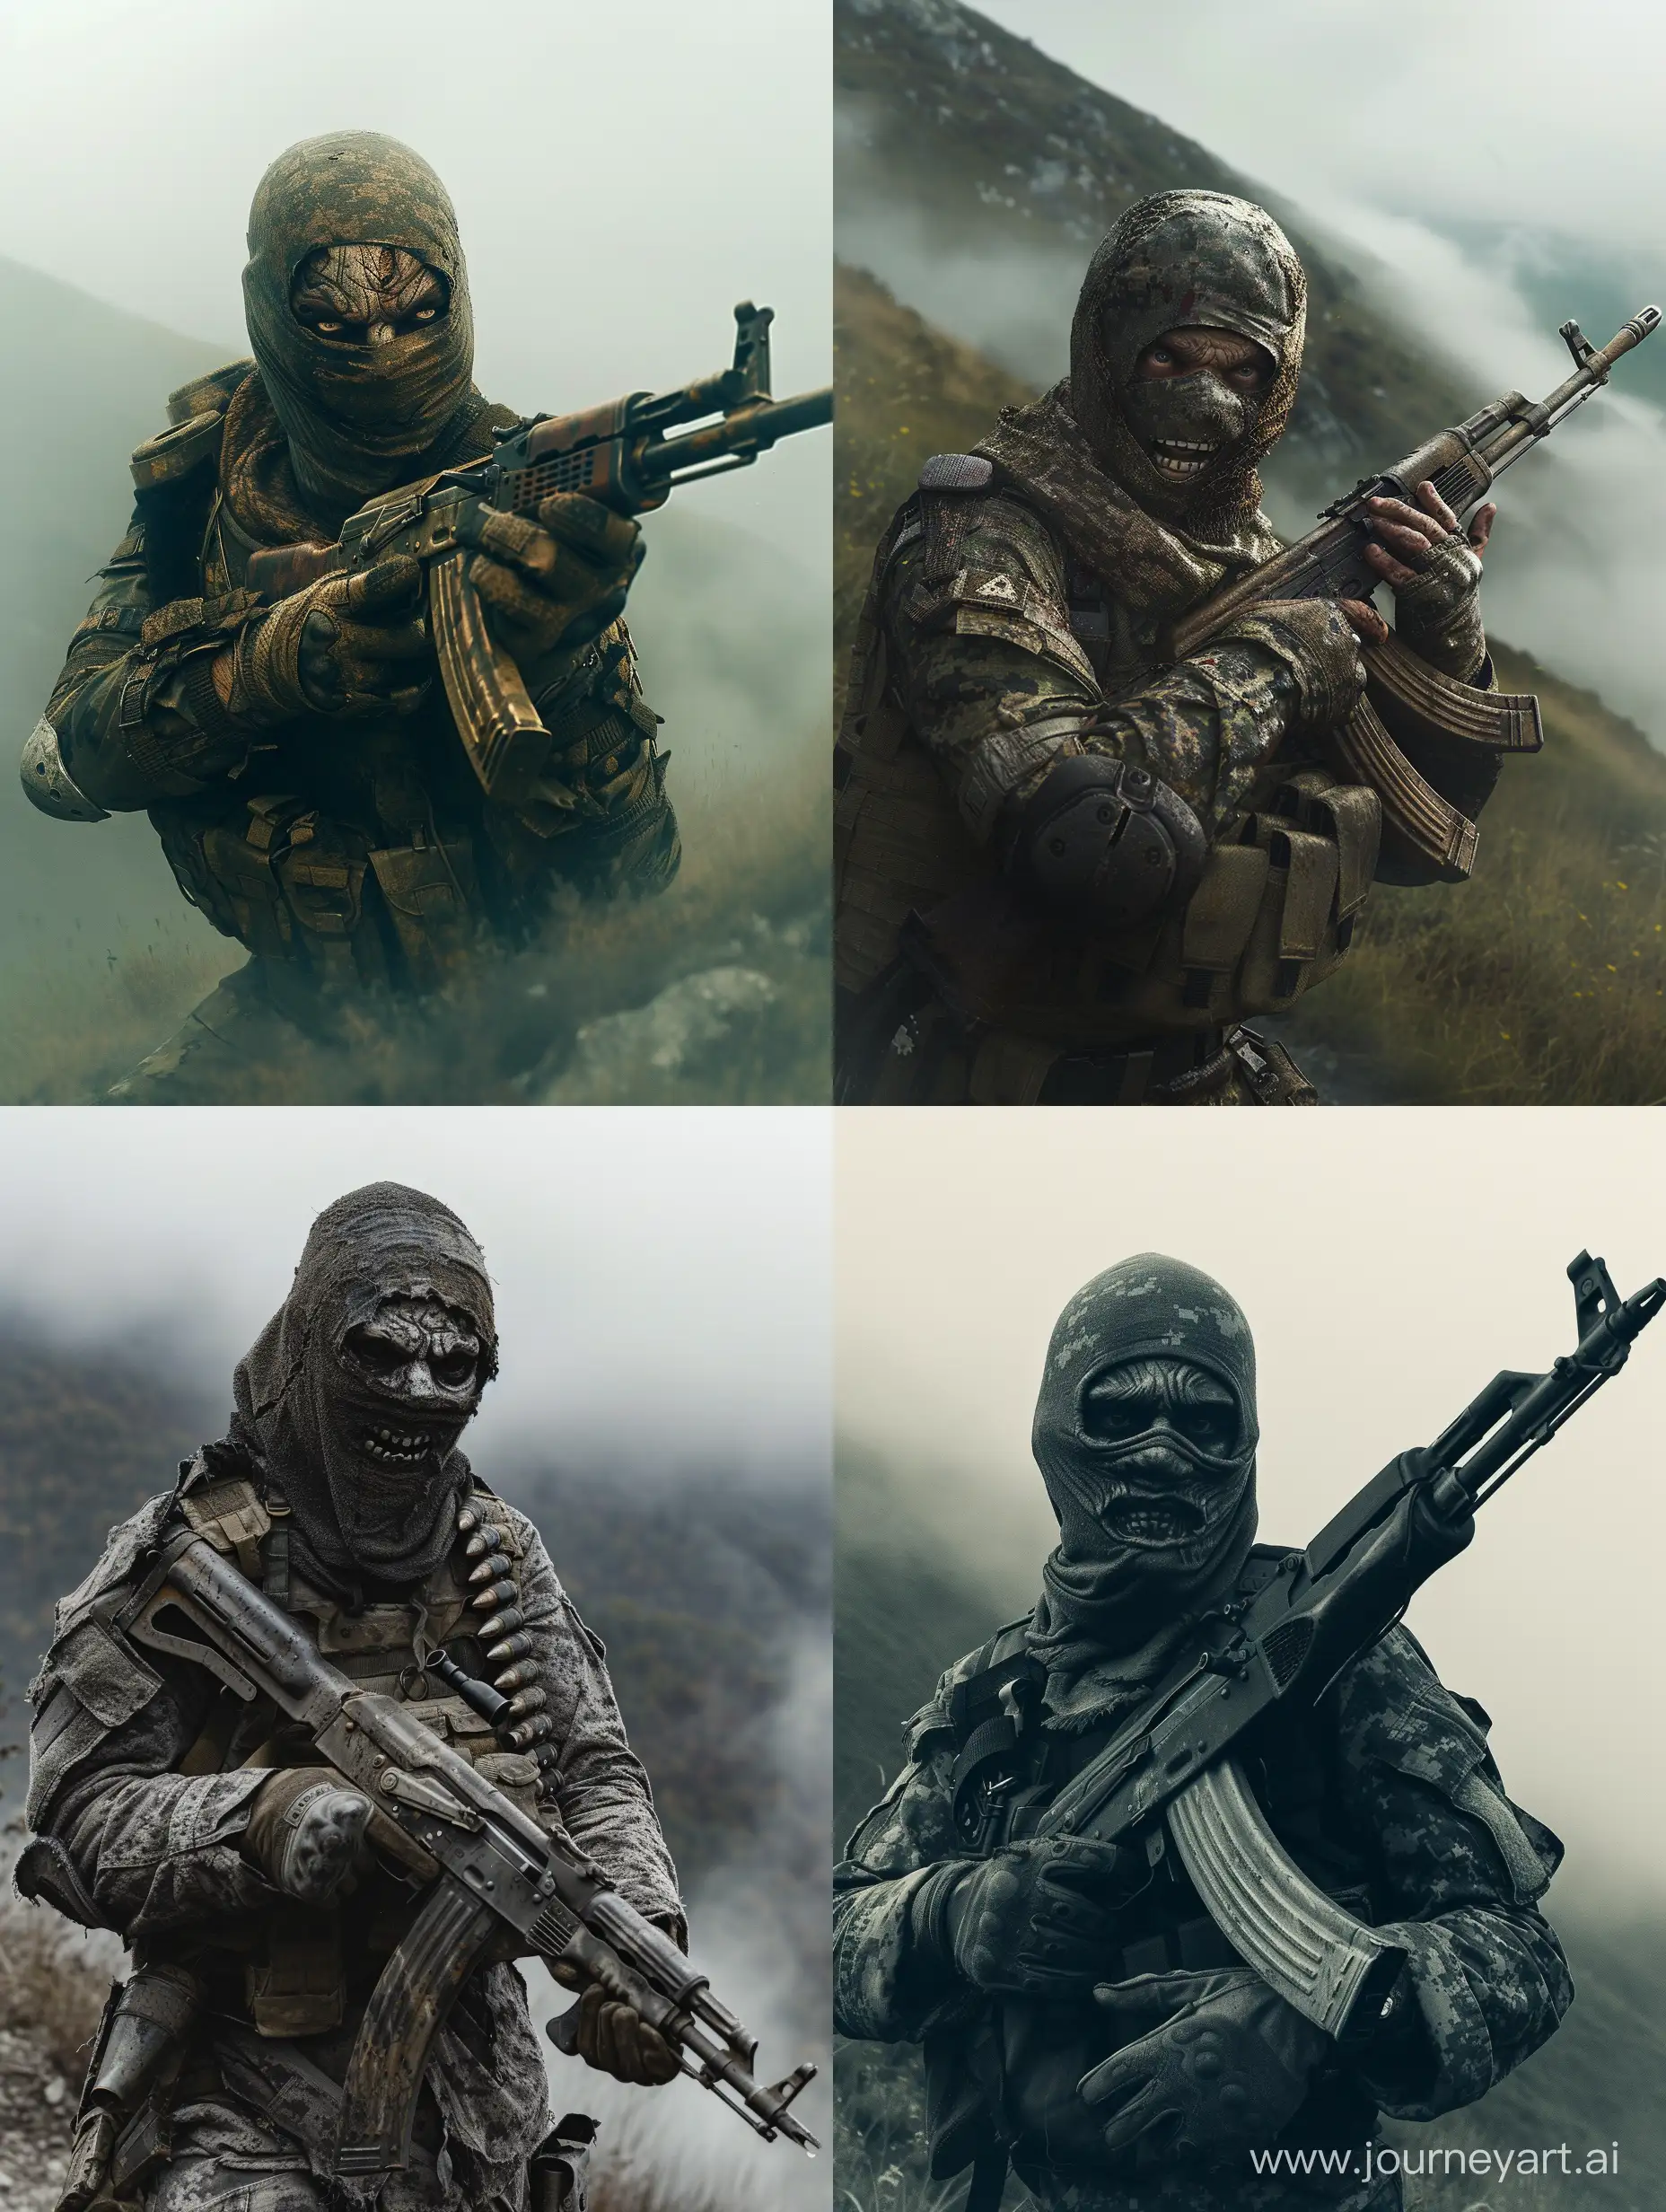 Grim-Warrior-in-Misty-Hills-Reflections-of-War-and-Fear